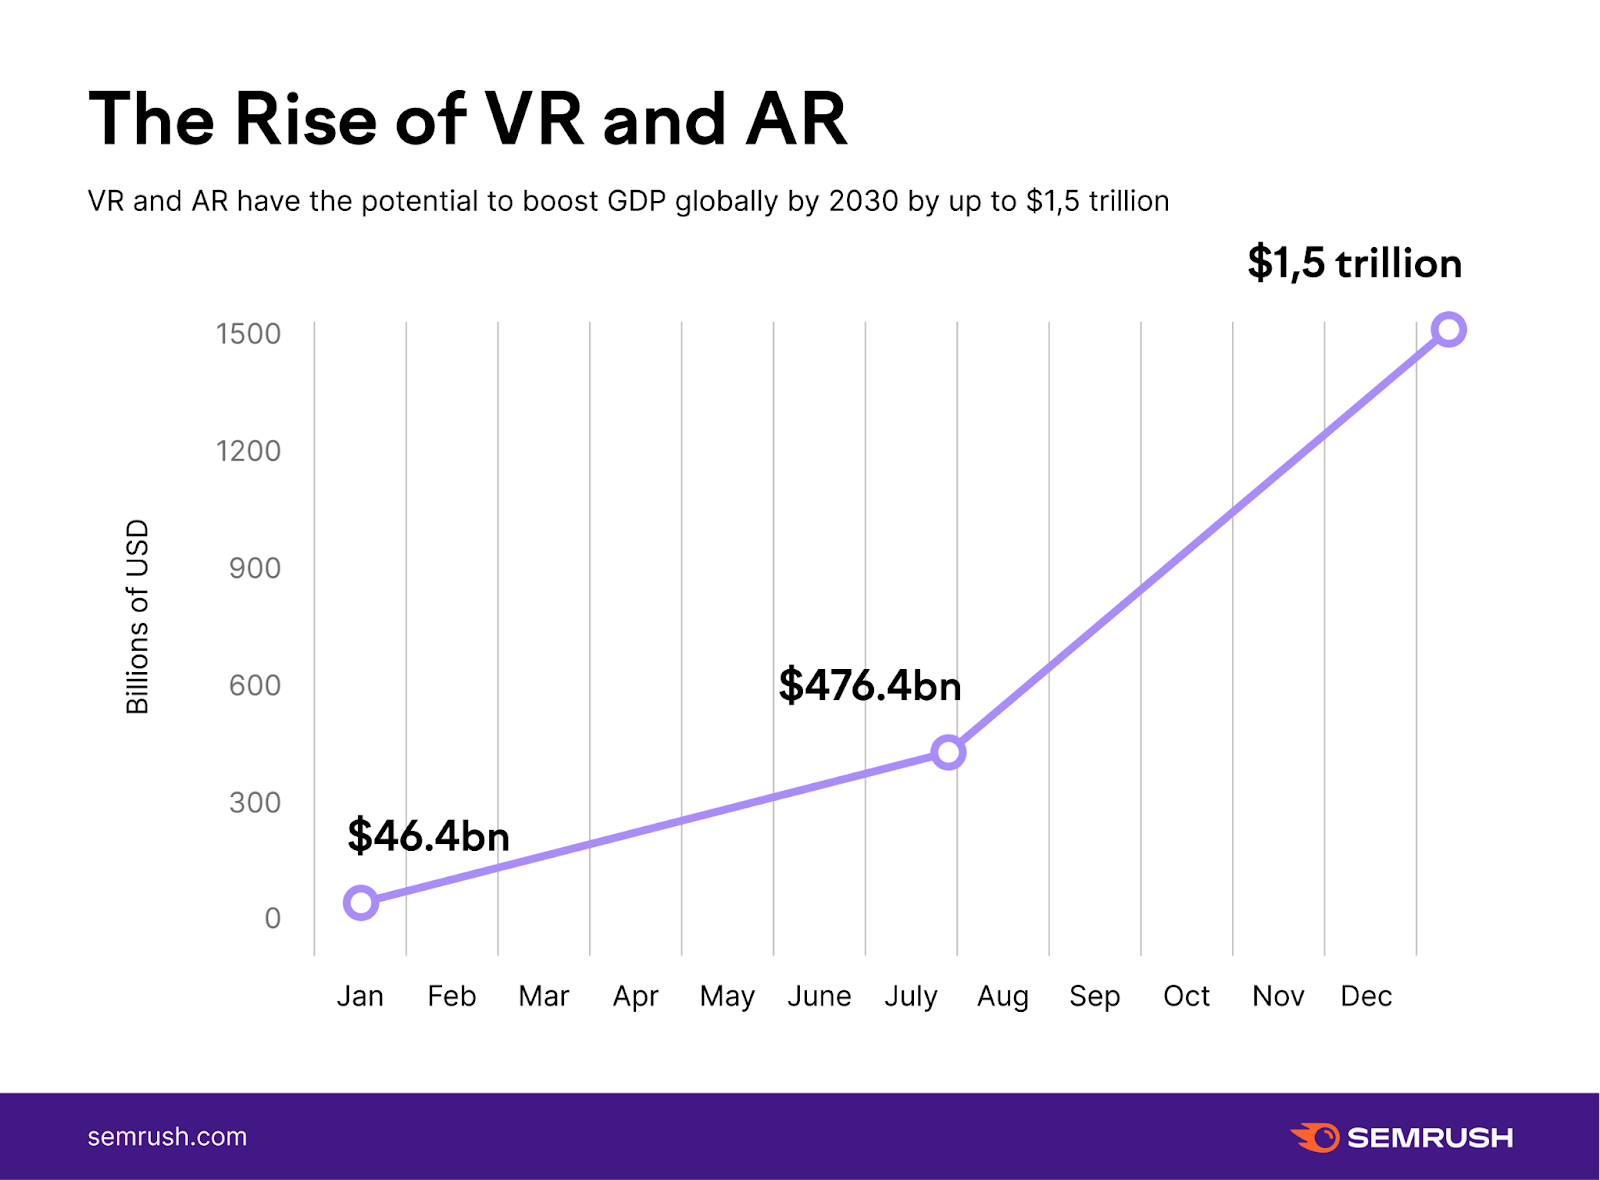 The rise of virtual reality and augmented reality. VR and AR have the potential to boost GDP globally by 2030 by up to 1.5 trillion dollars.